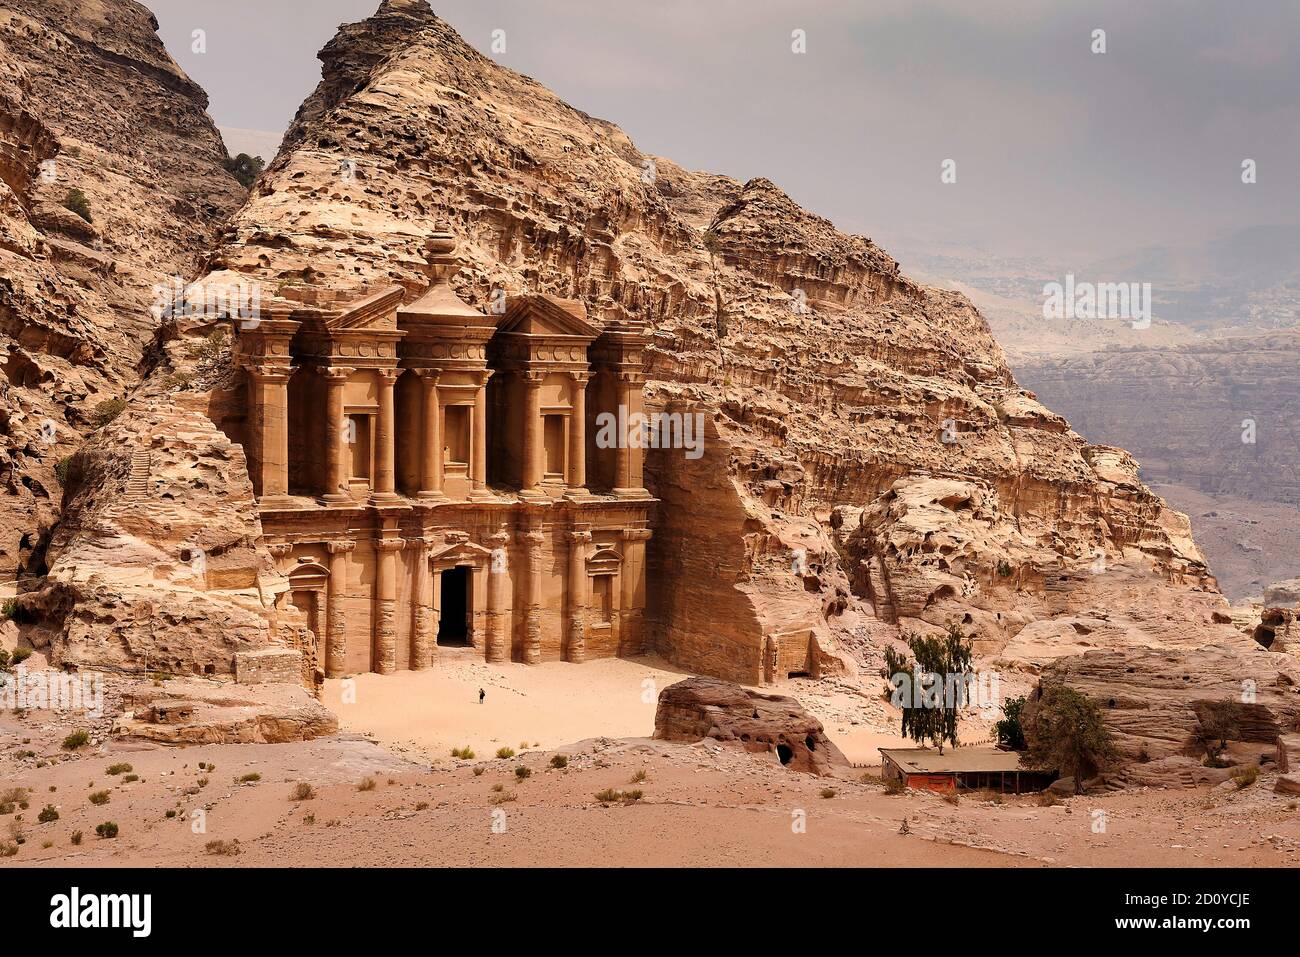 El Deir - The Monastery at Petra, Jordan with a person standing in front  Stock Photo - Alamy